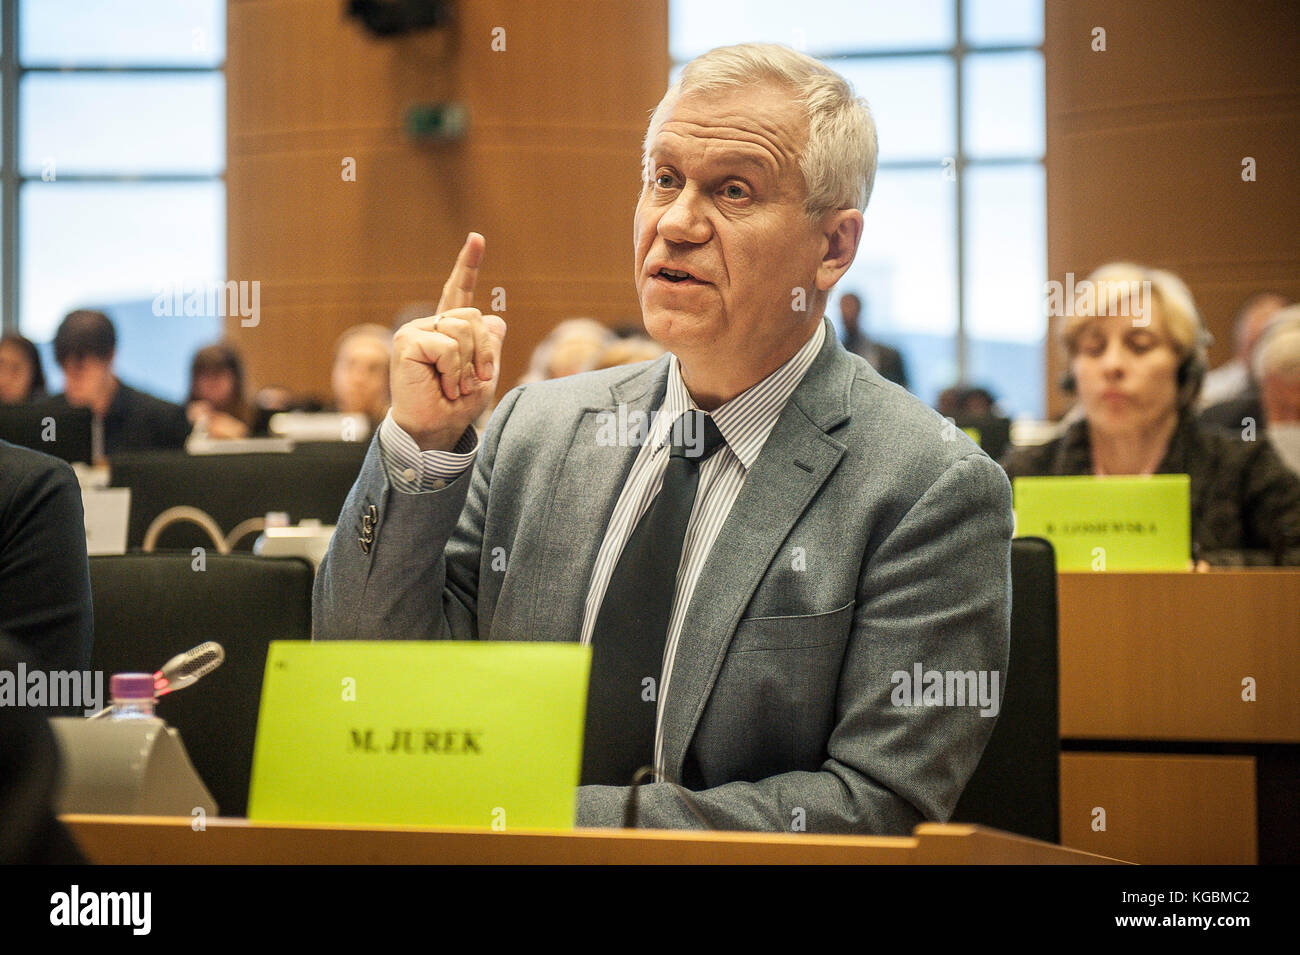 Member of European Parliament (MEP) Marek Jurek during meeting of Committee on Civil Liberties, Justice and Home Affairs on Rule of Law in Poland at European Parliament headquarters in Brussels, Belgium on 06.11.2017 by Wiktor Dabkowski | usage worldwide Stock Photo